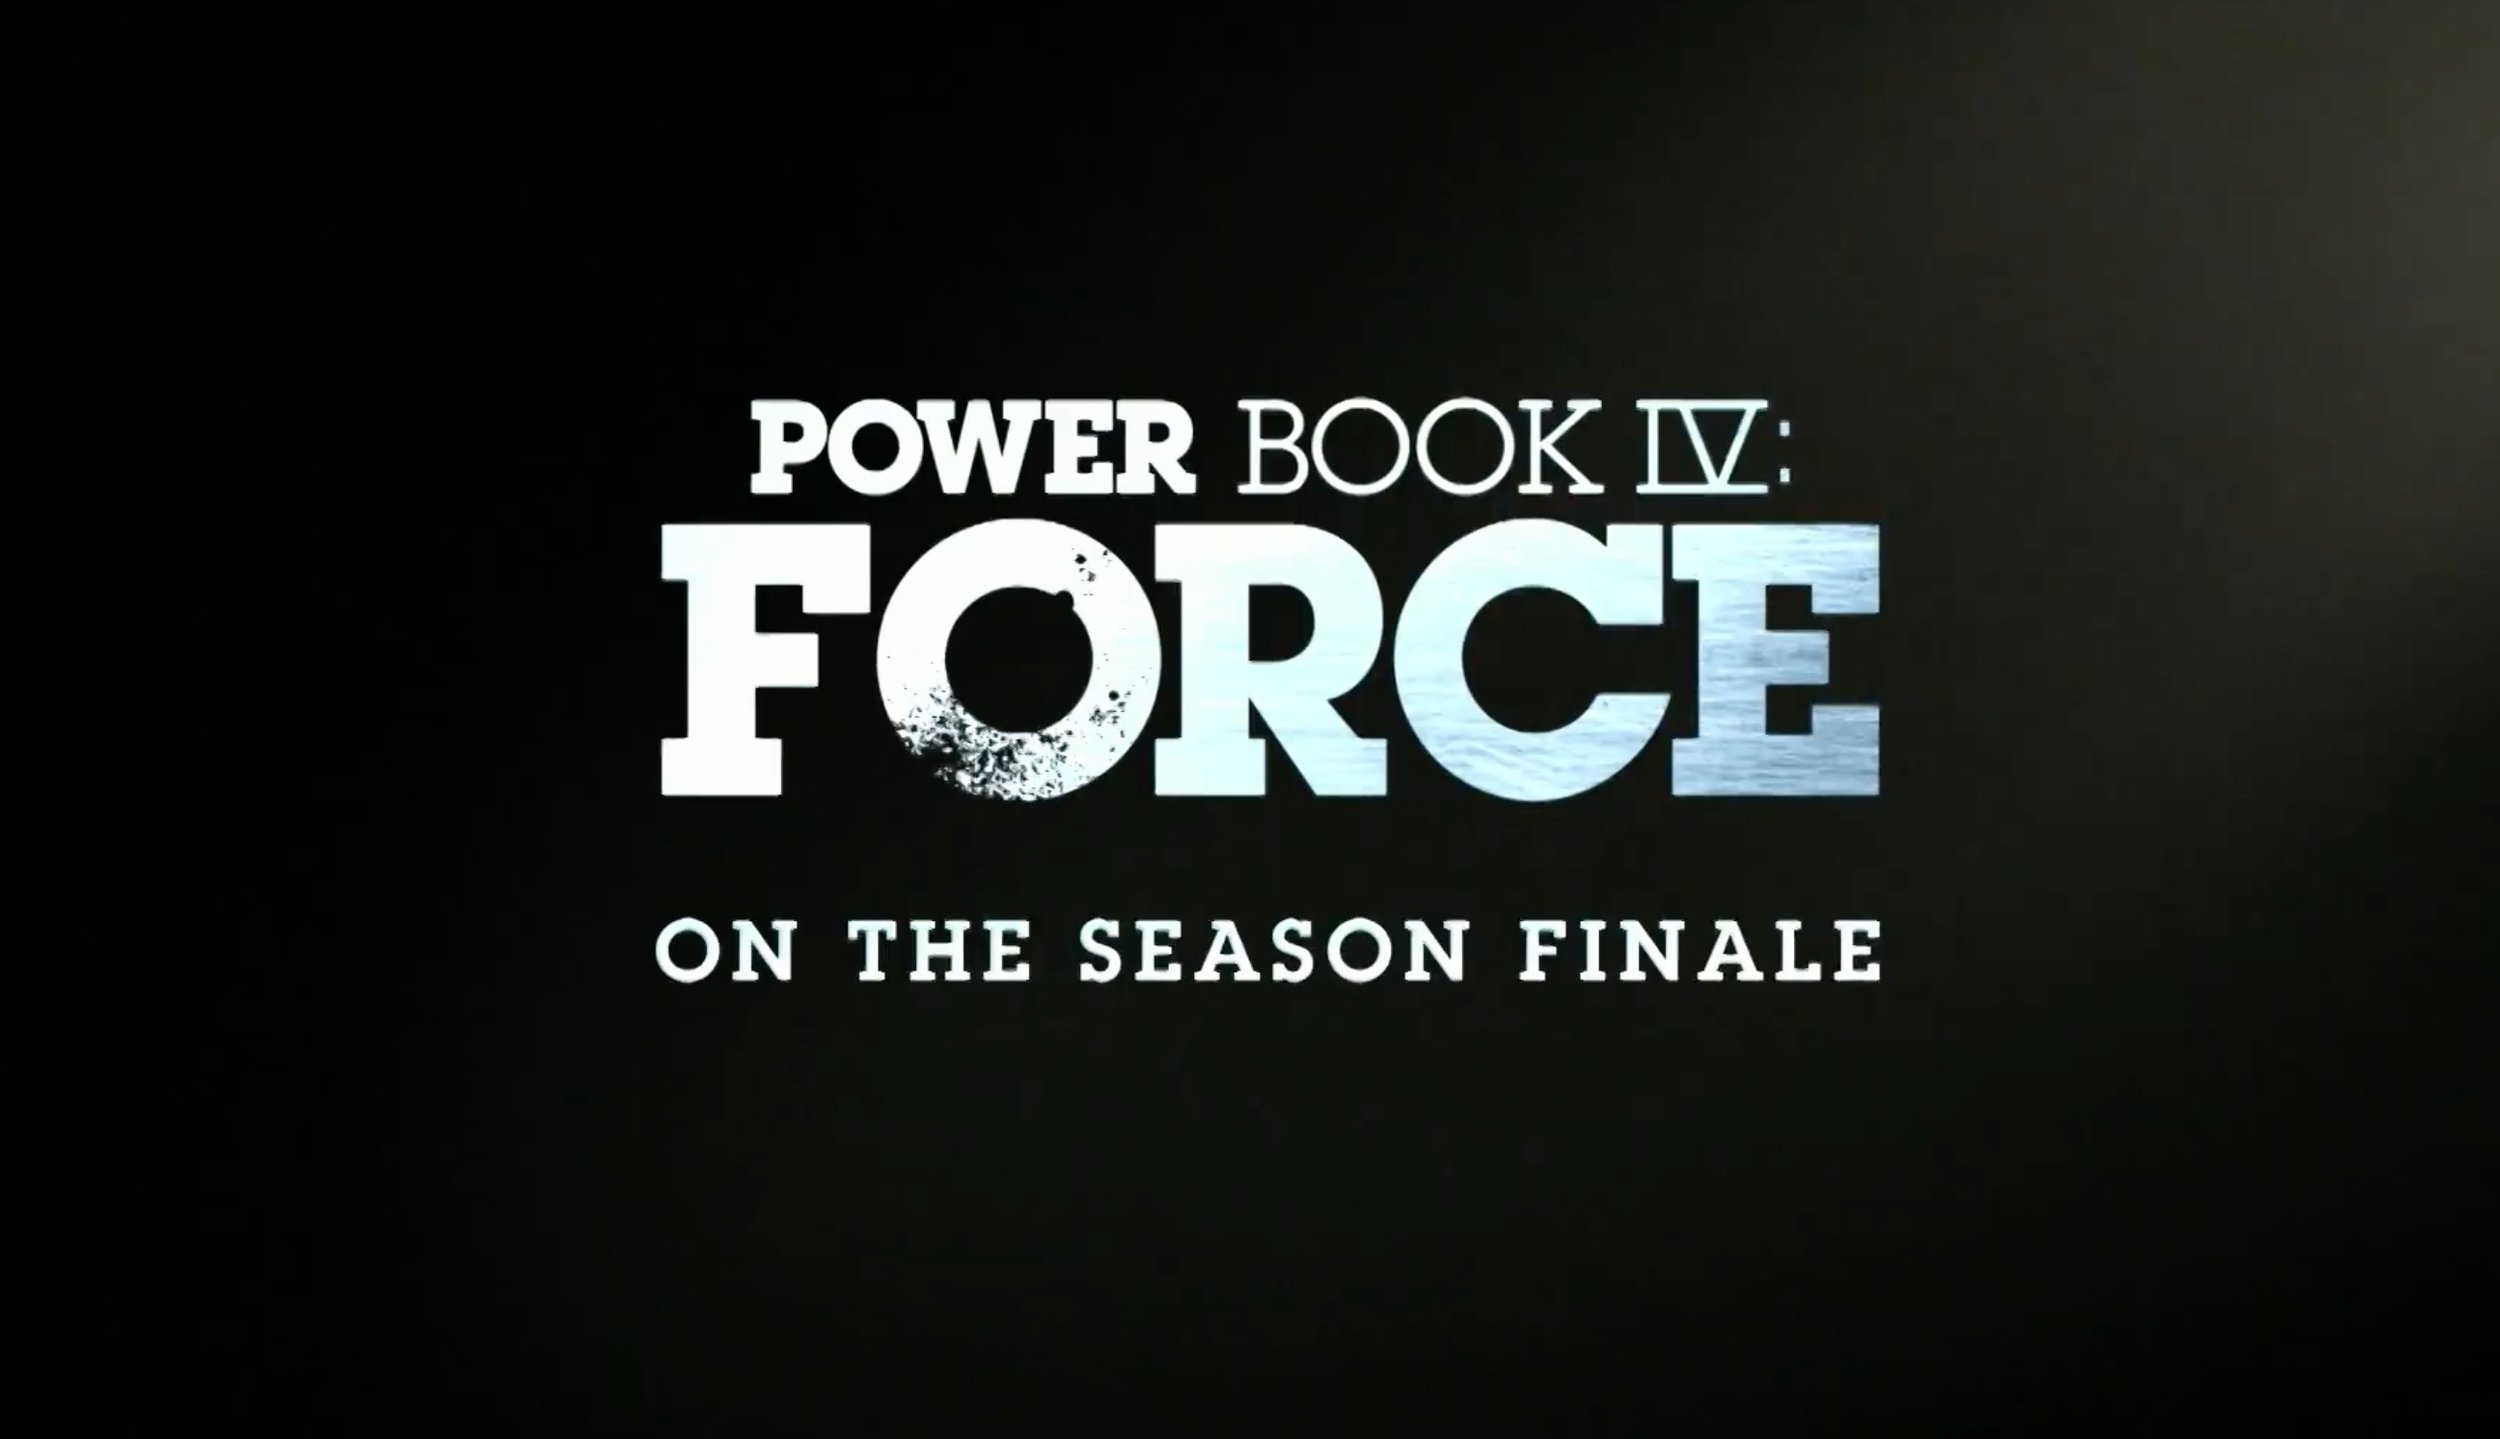 Power book s. Power book IV: Force.